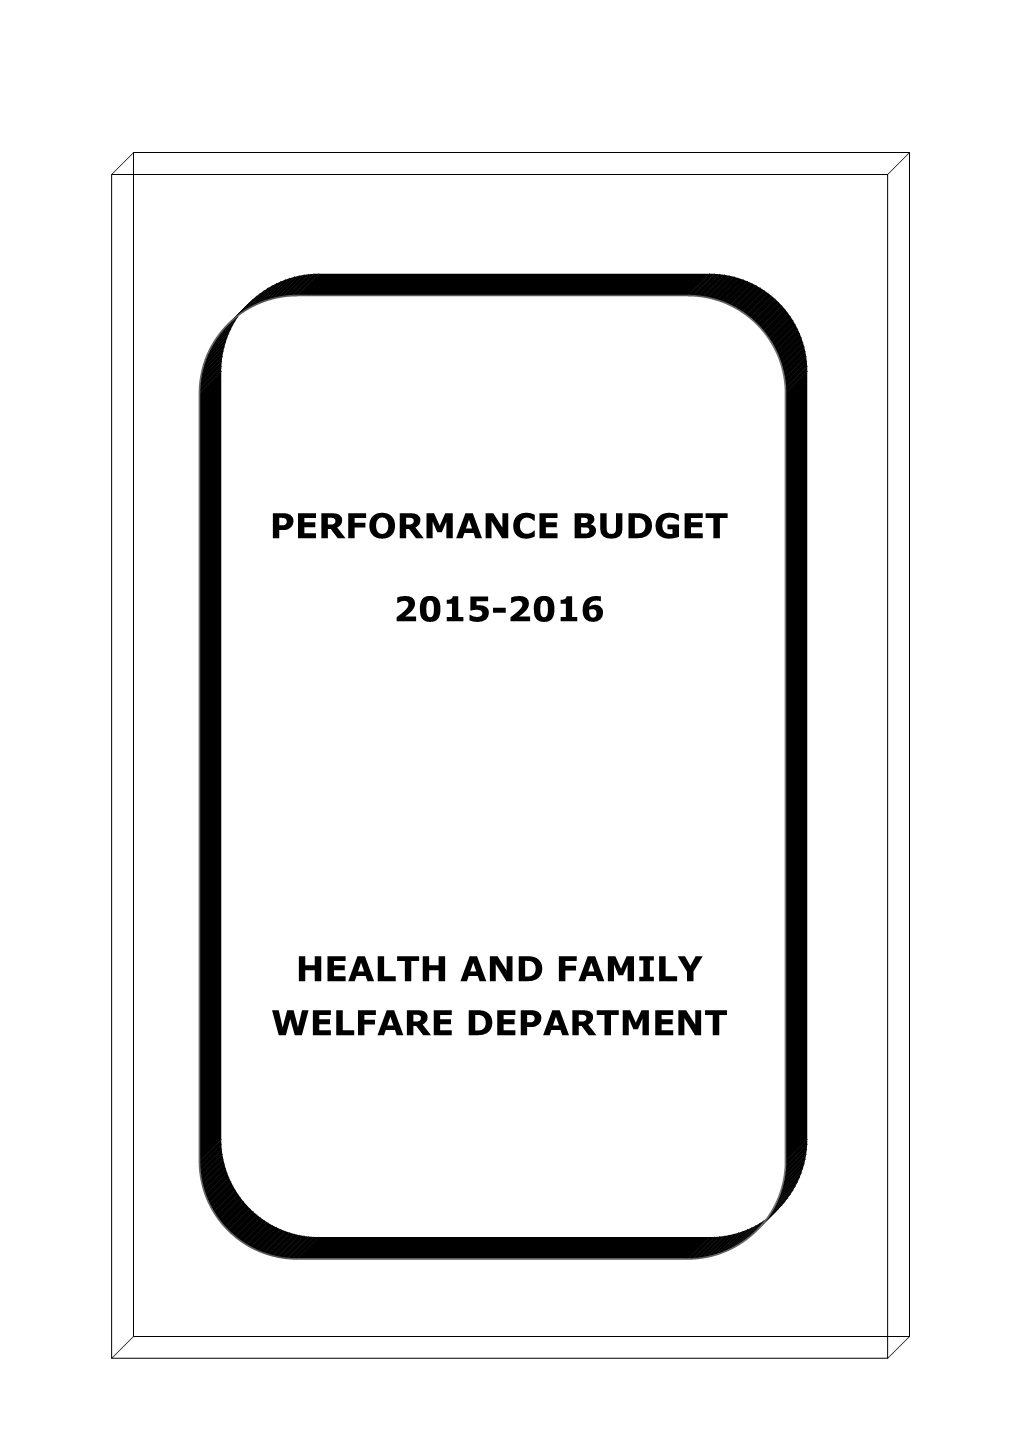 Performance Budget 2015-2016 Health and Family